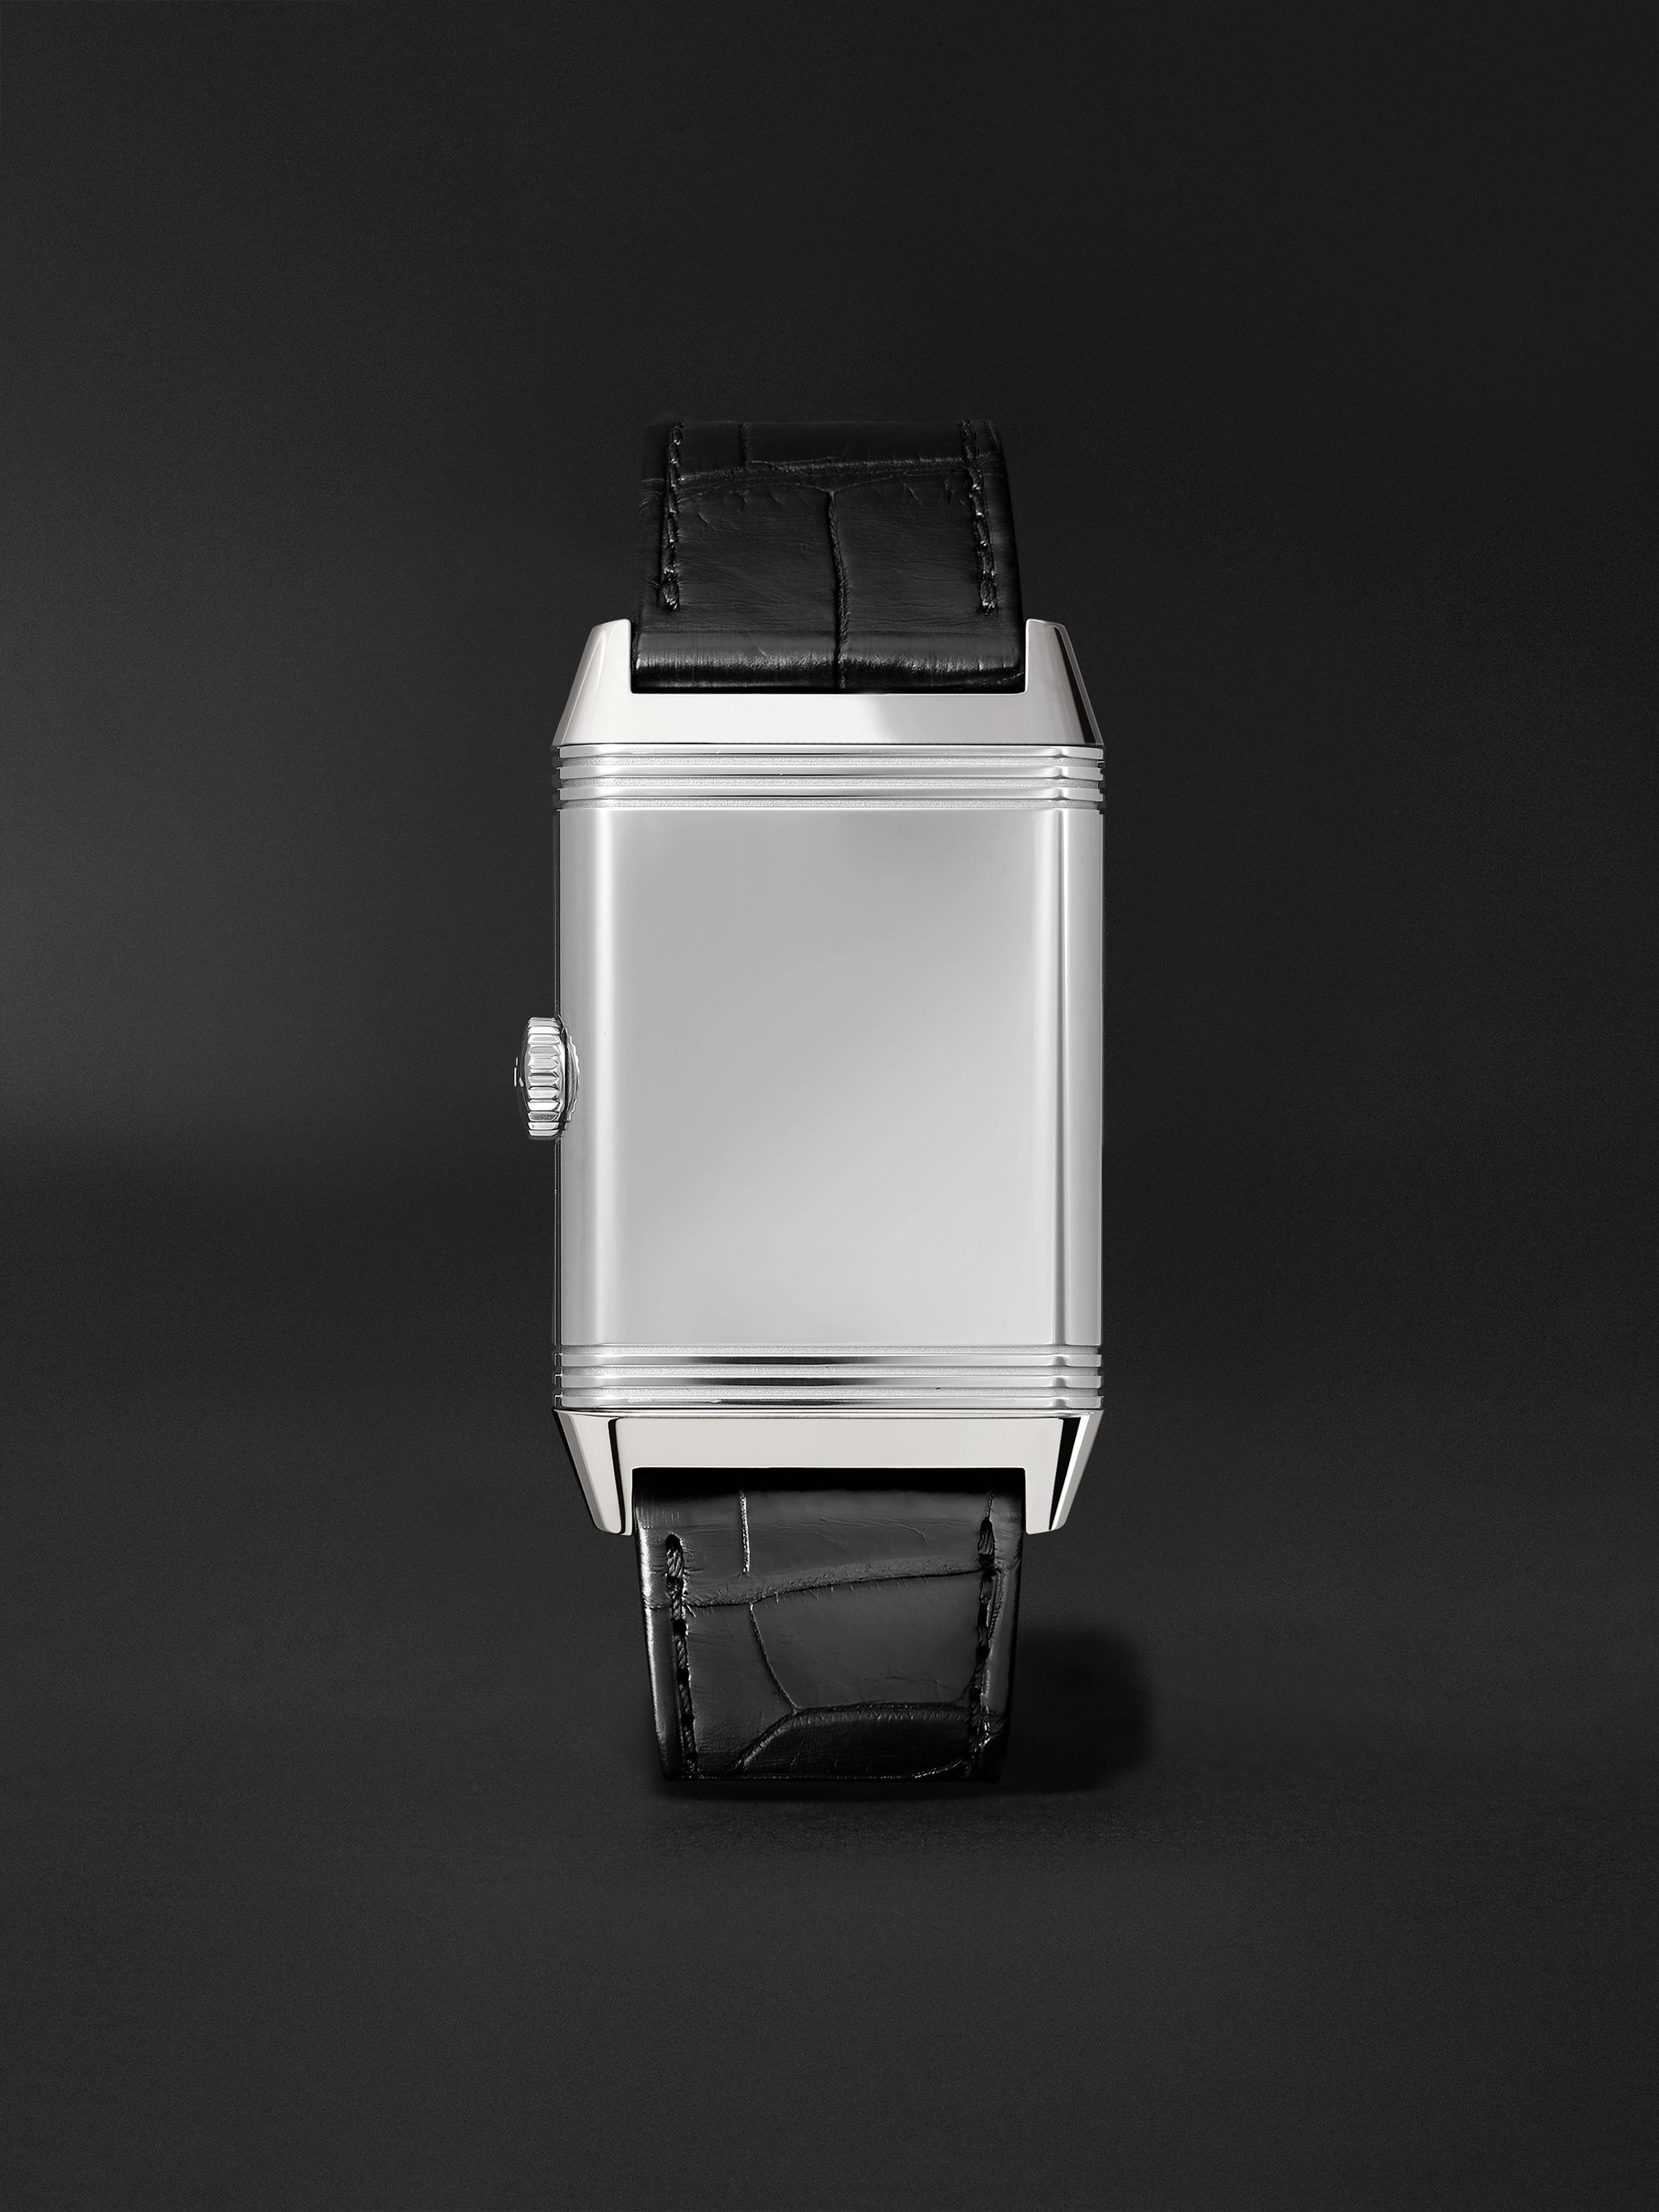 JAEGER-LECOULTRE Reverso Classic Large Hand-Wound 45mm x 27mm Stainless Steel and Alligator Watch, Ref. No. Q3858520